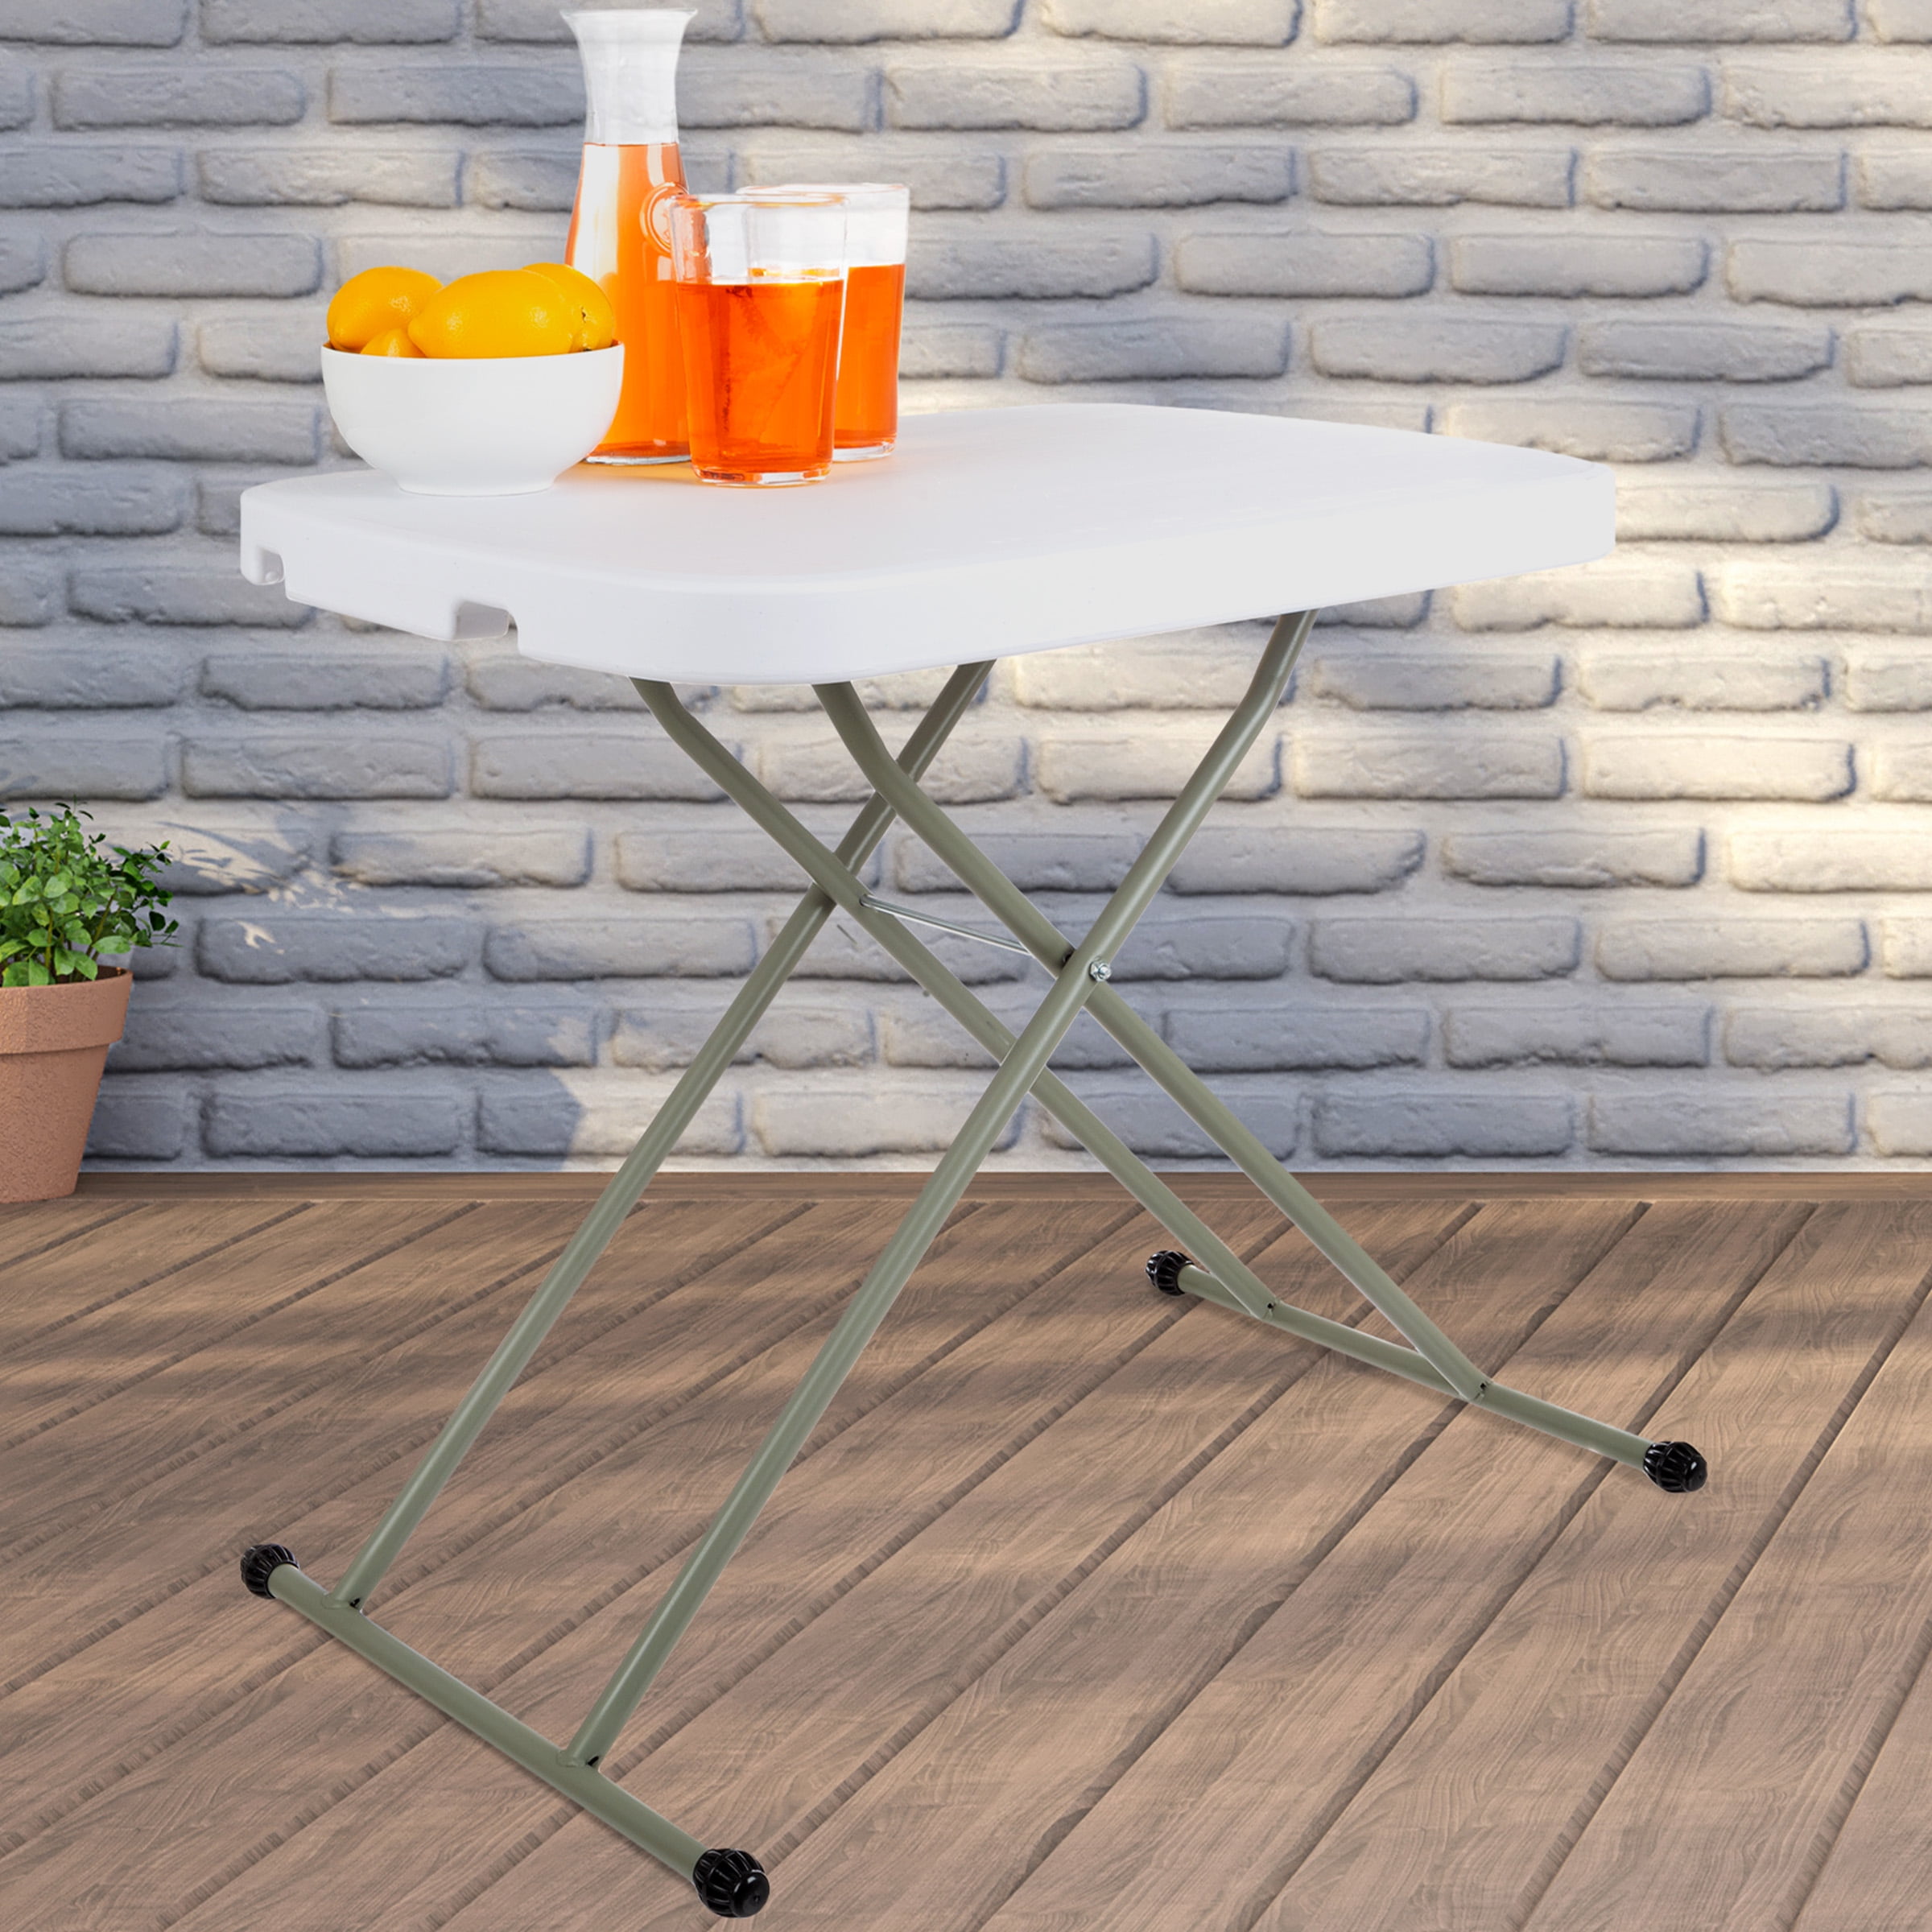 Everyday Home Adjustable Folding Table for Camping, Cards and